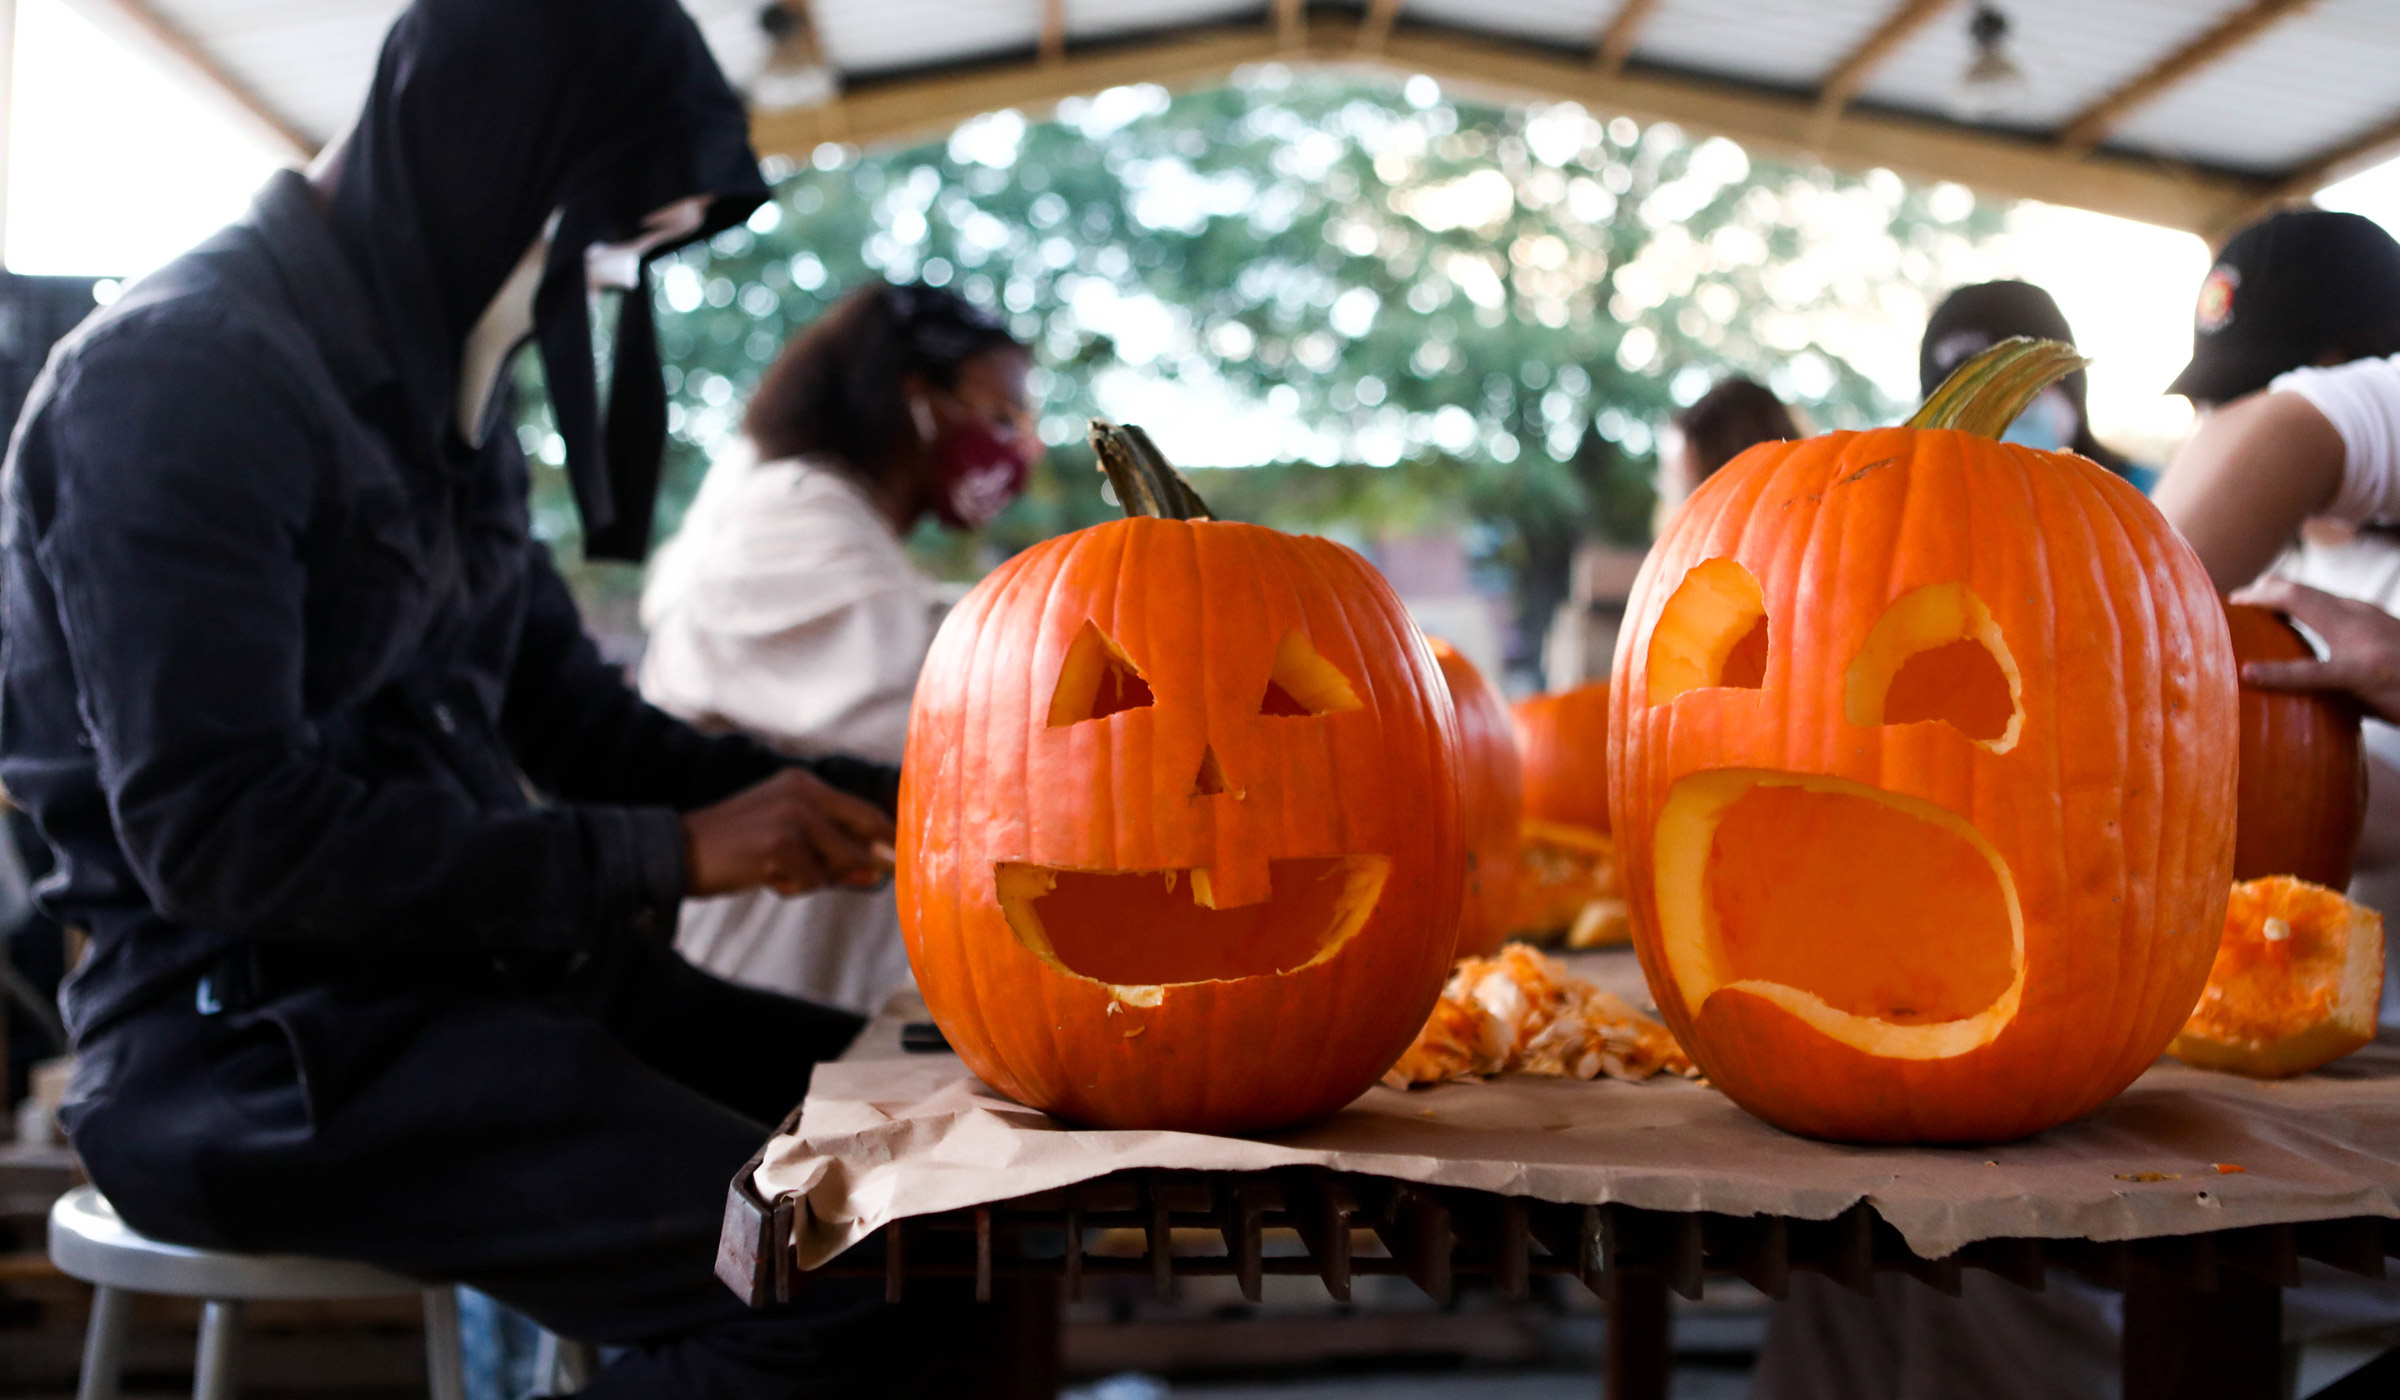 With two freshly carved Halloween pumpkins in the foreground, costumed students carve in the background, out of focus.